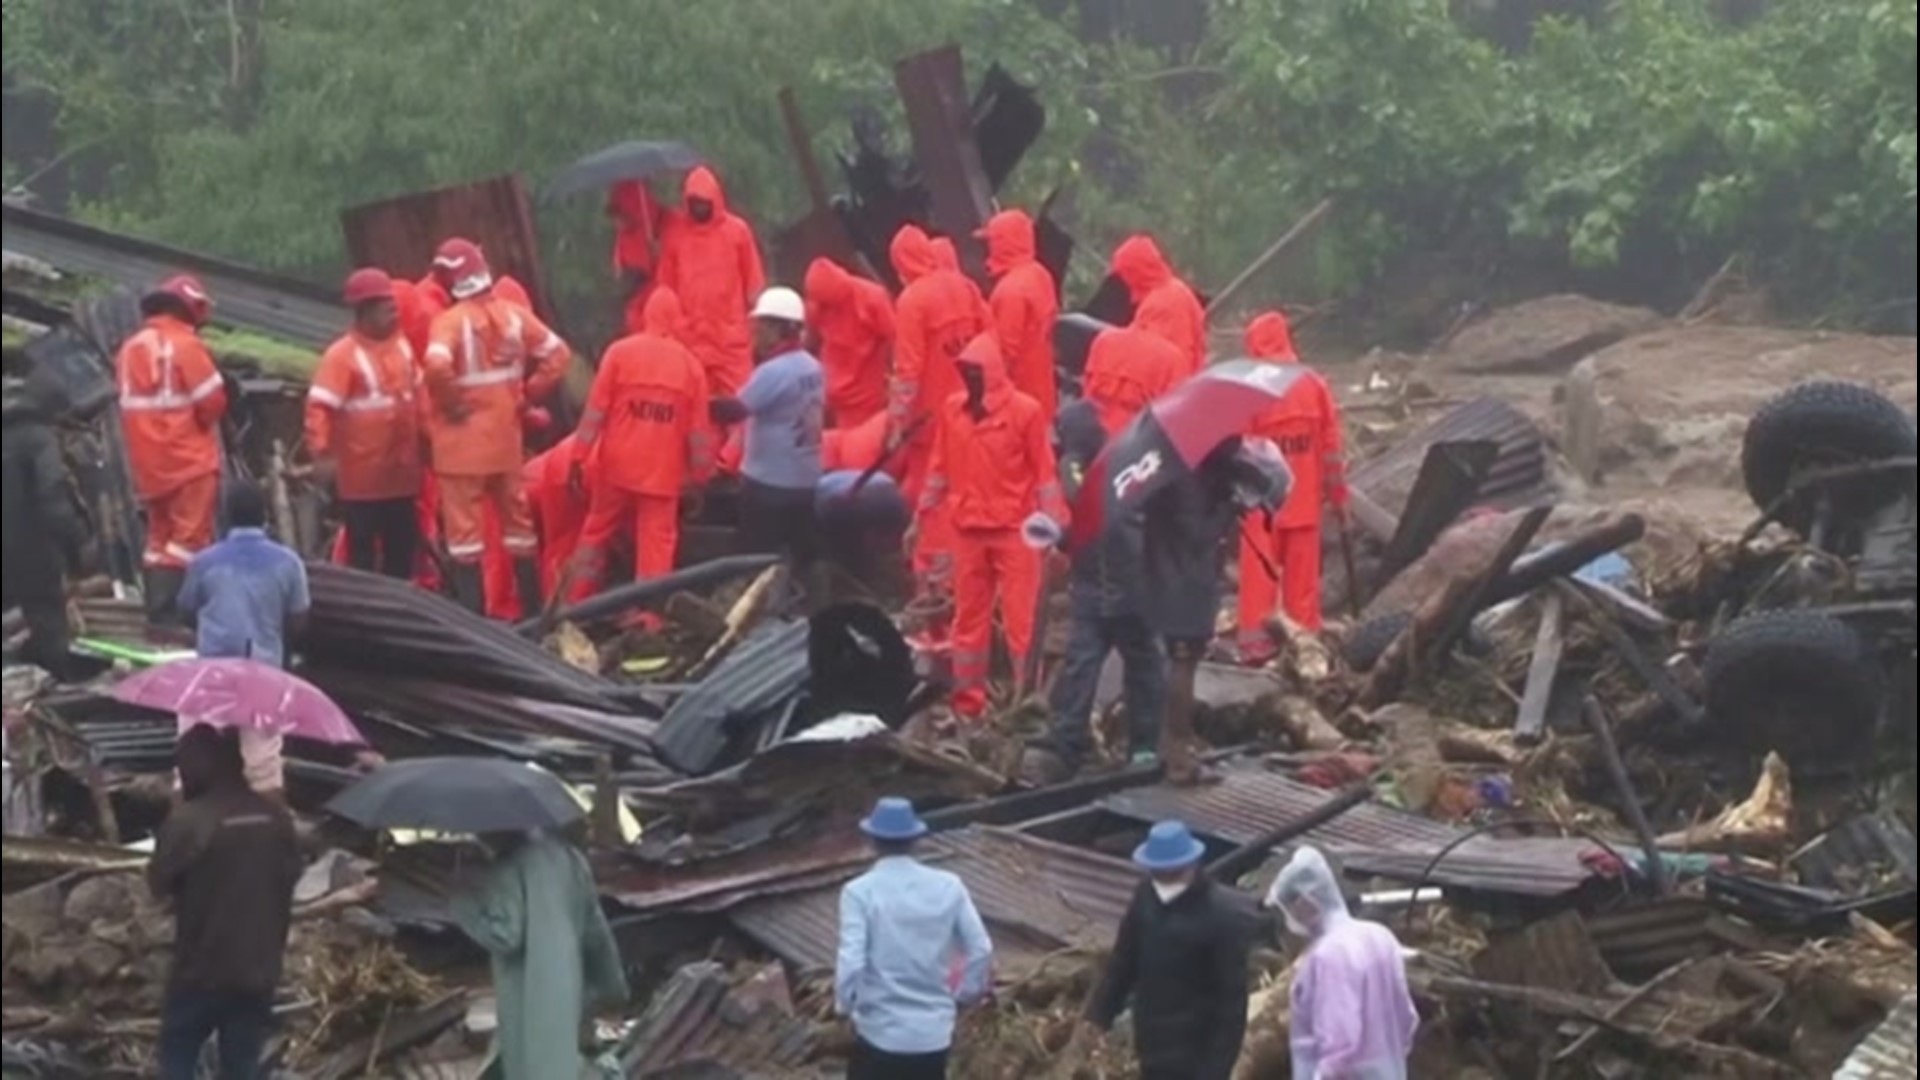 Heavy rainfall triggered a landslide in Kerala, India, which caused at least 43 fatalities in the region on Aug. 9.